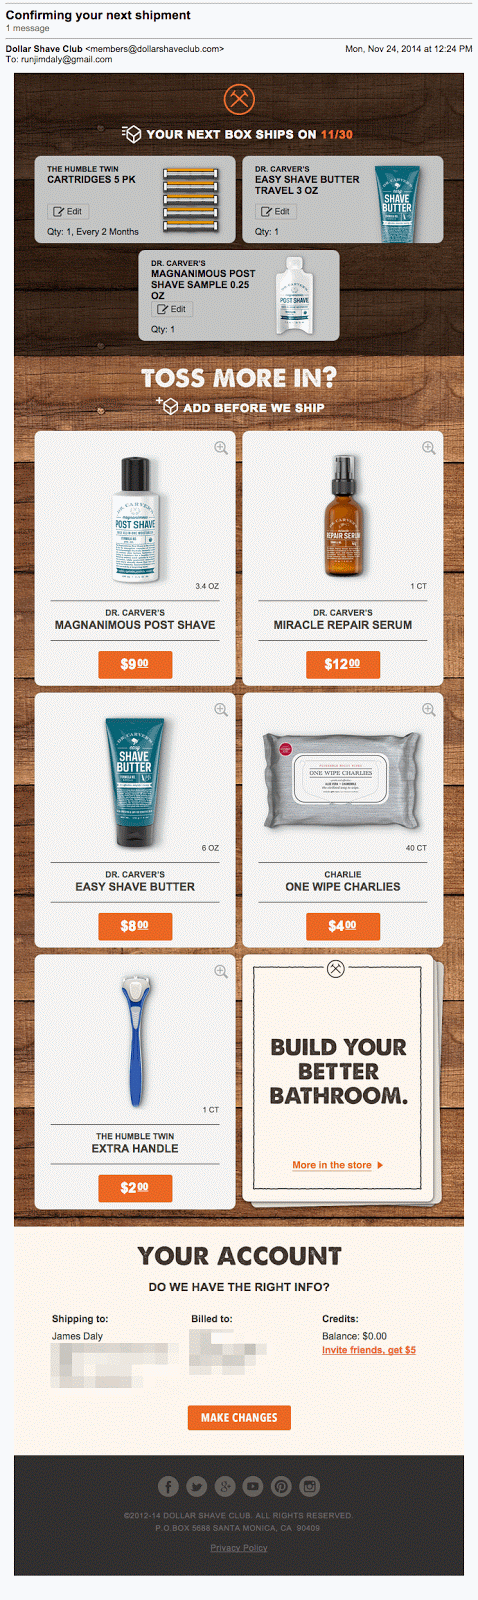 Dollar Shave Club Upsell Email